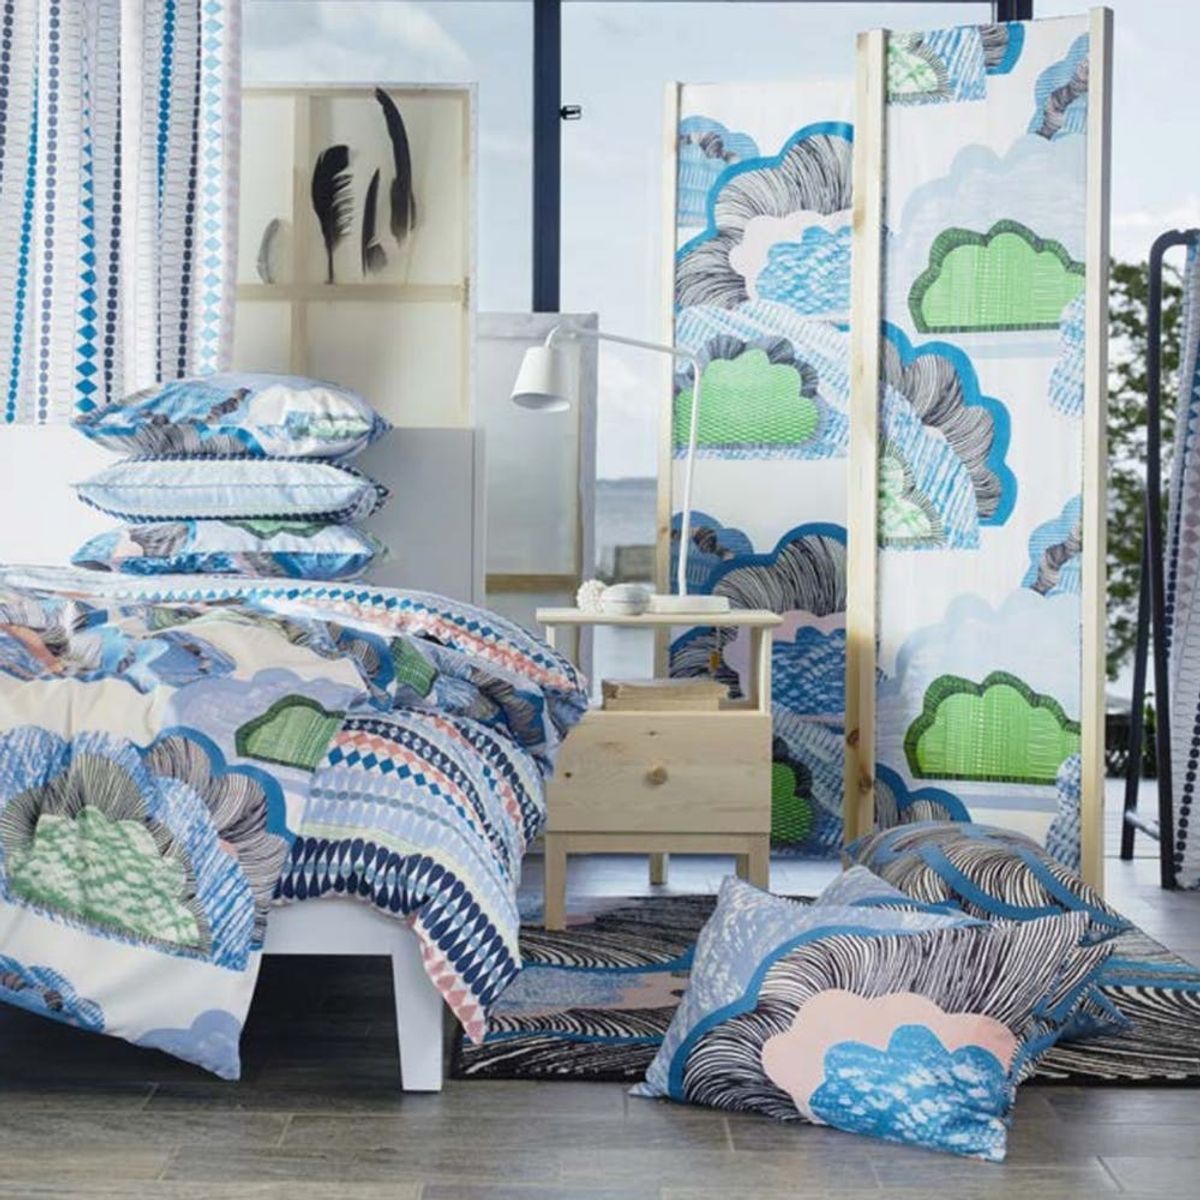 11 Items in IKEA’s New Fall Line You Need Now Brit + Co